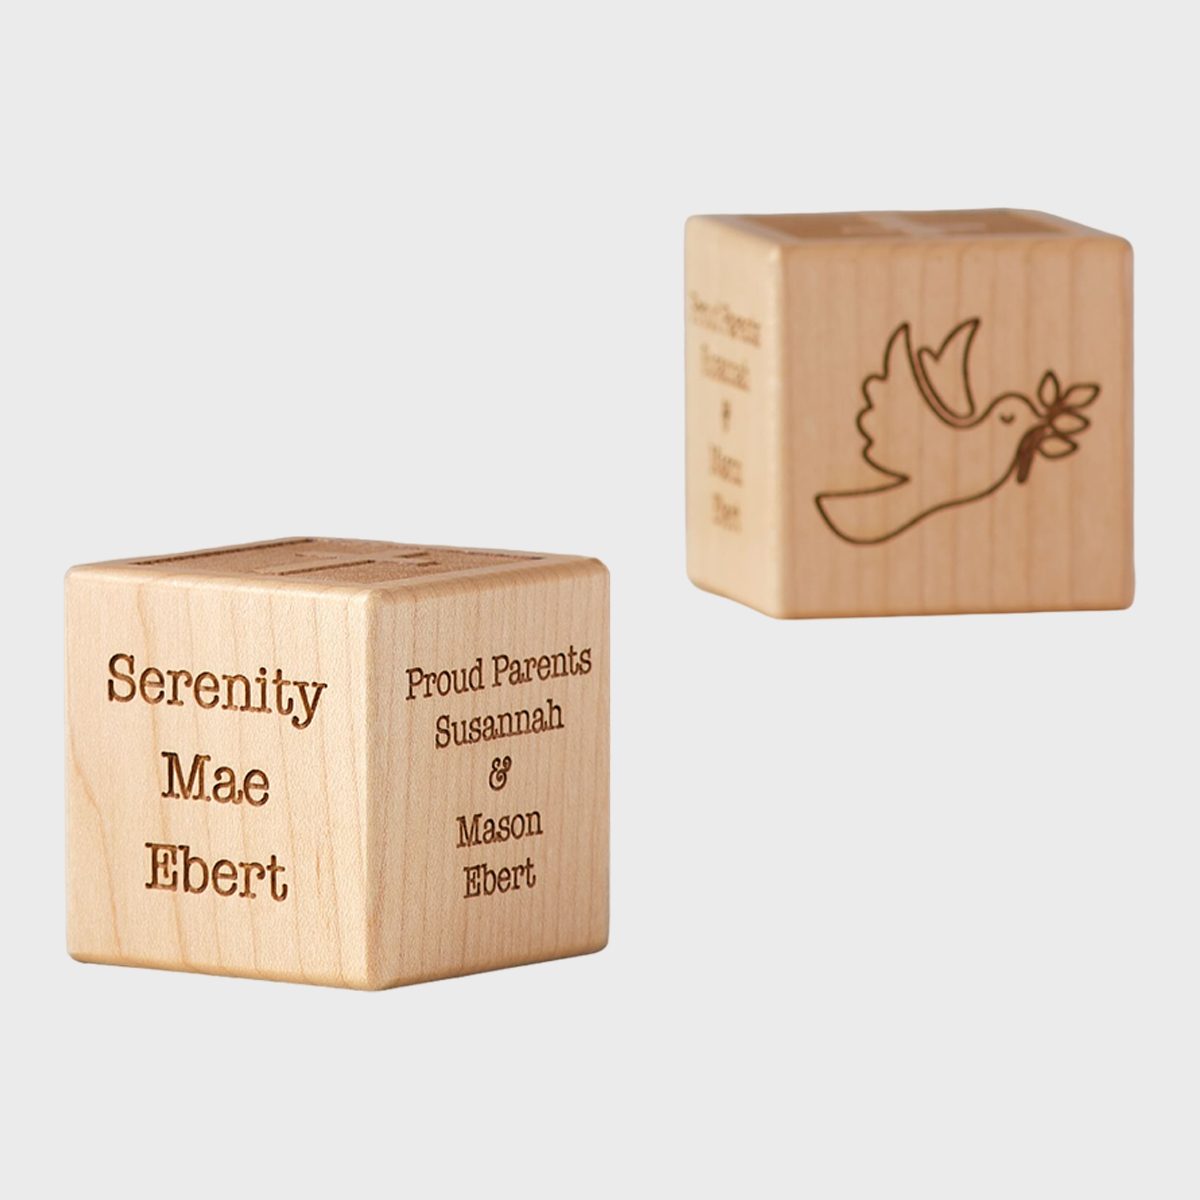 <p>Help them remember their baby's special day with this beautiful <a href="https://www.potterybarnkids.com/products/personalized-wooden-blocks/" rel="noopener noreferrer">keepsake block</a>. This 2-inch by 2-inch block features solid maple wood and personalization options with the baby's name, parents' name, date, weight, length and baby feet image.</p> <p class="listicle-page__cta-button-shop"><a class="shop-btn" href="https://www.potterybarnkids.com/products/personalized-wooden-blocks/">Shop Now</a></p>